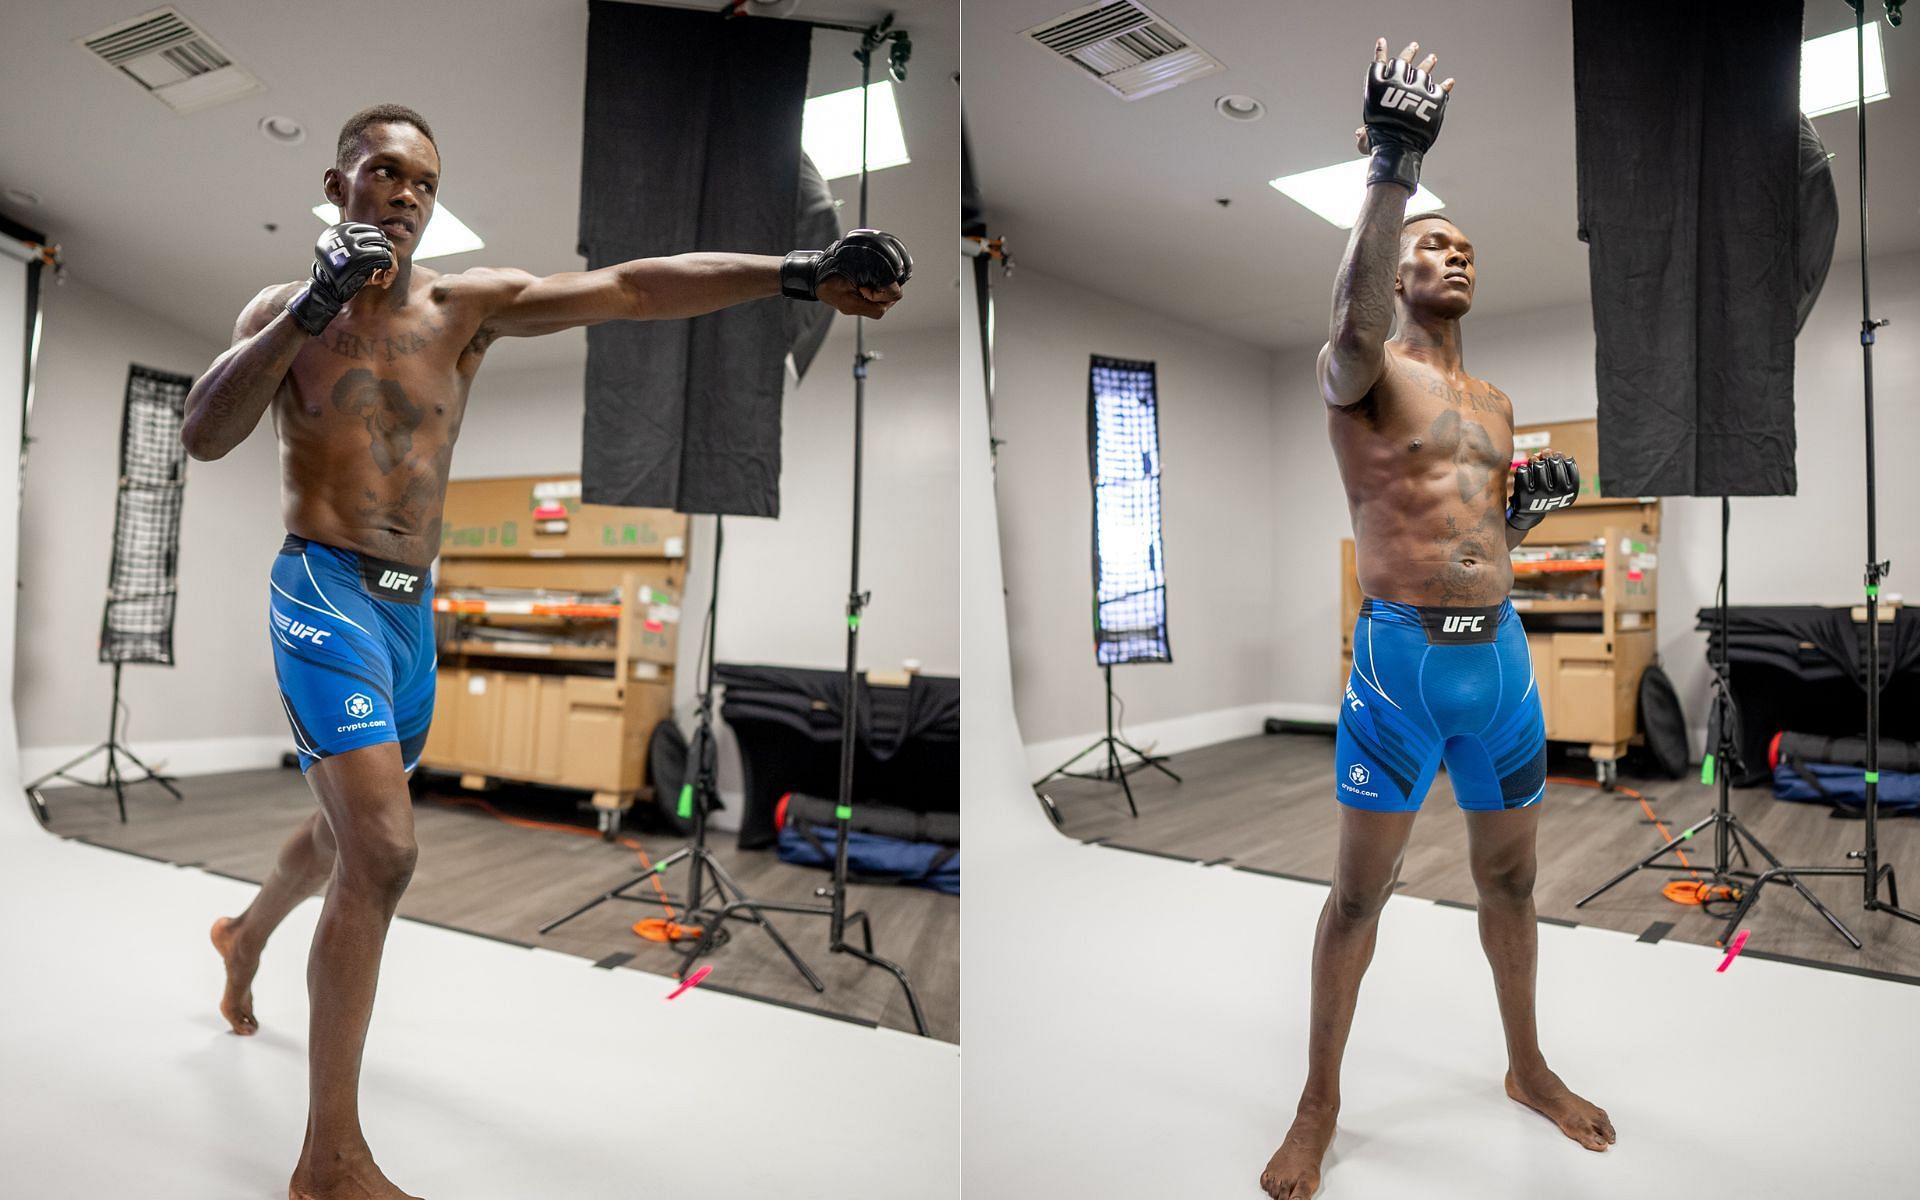 Israel Adesanya will be wearing a new color scheme for his rematch with Alex Pereira [Image Credit: http://twitter.com/ufc